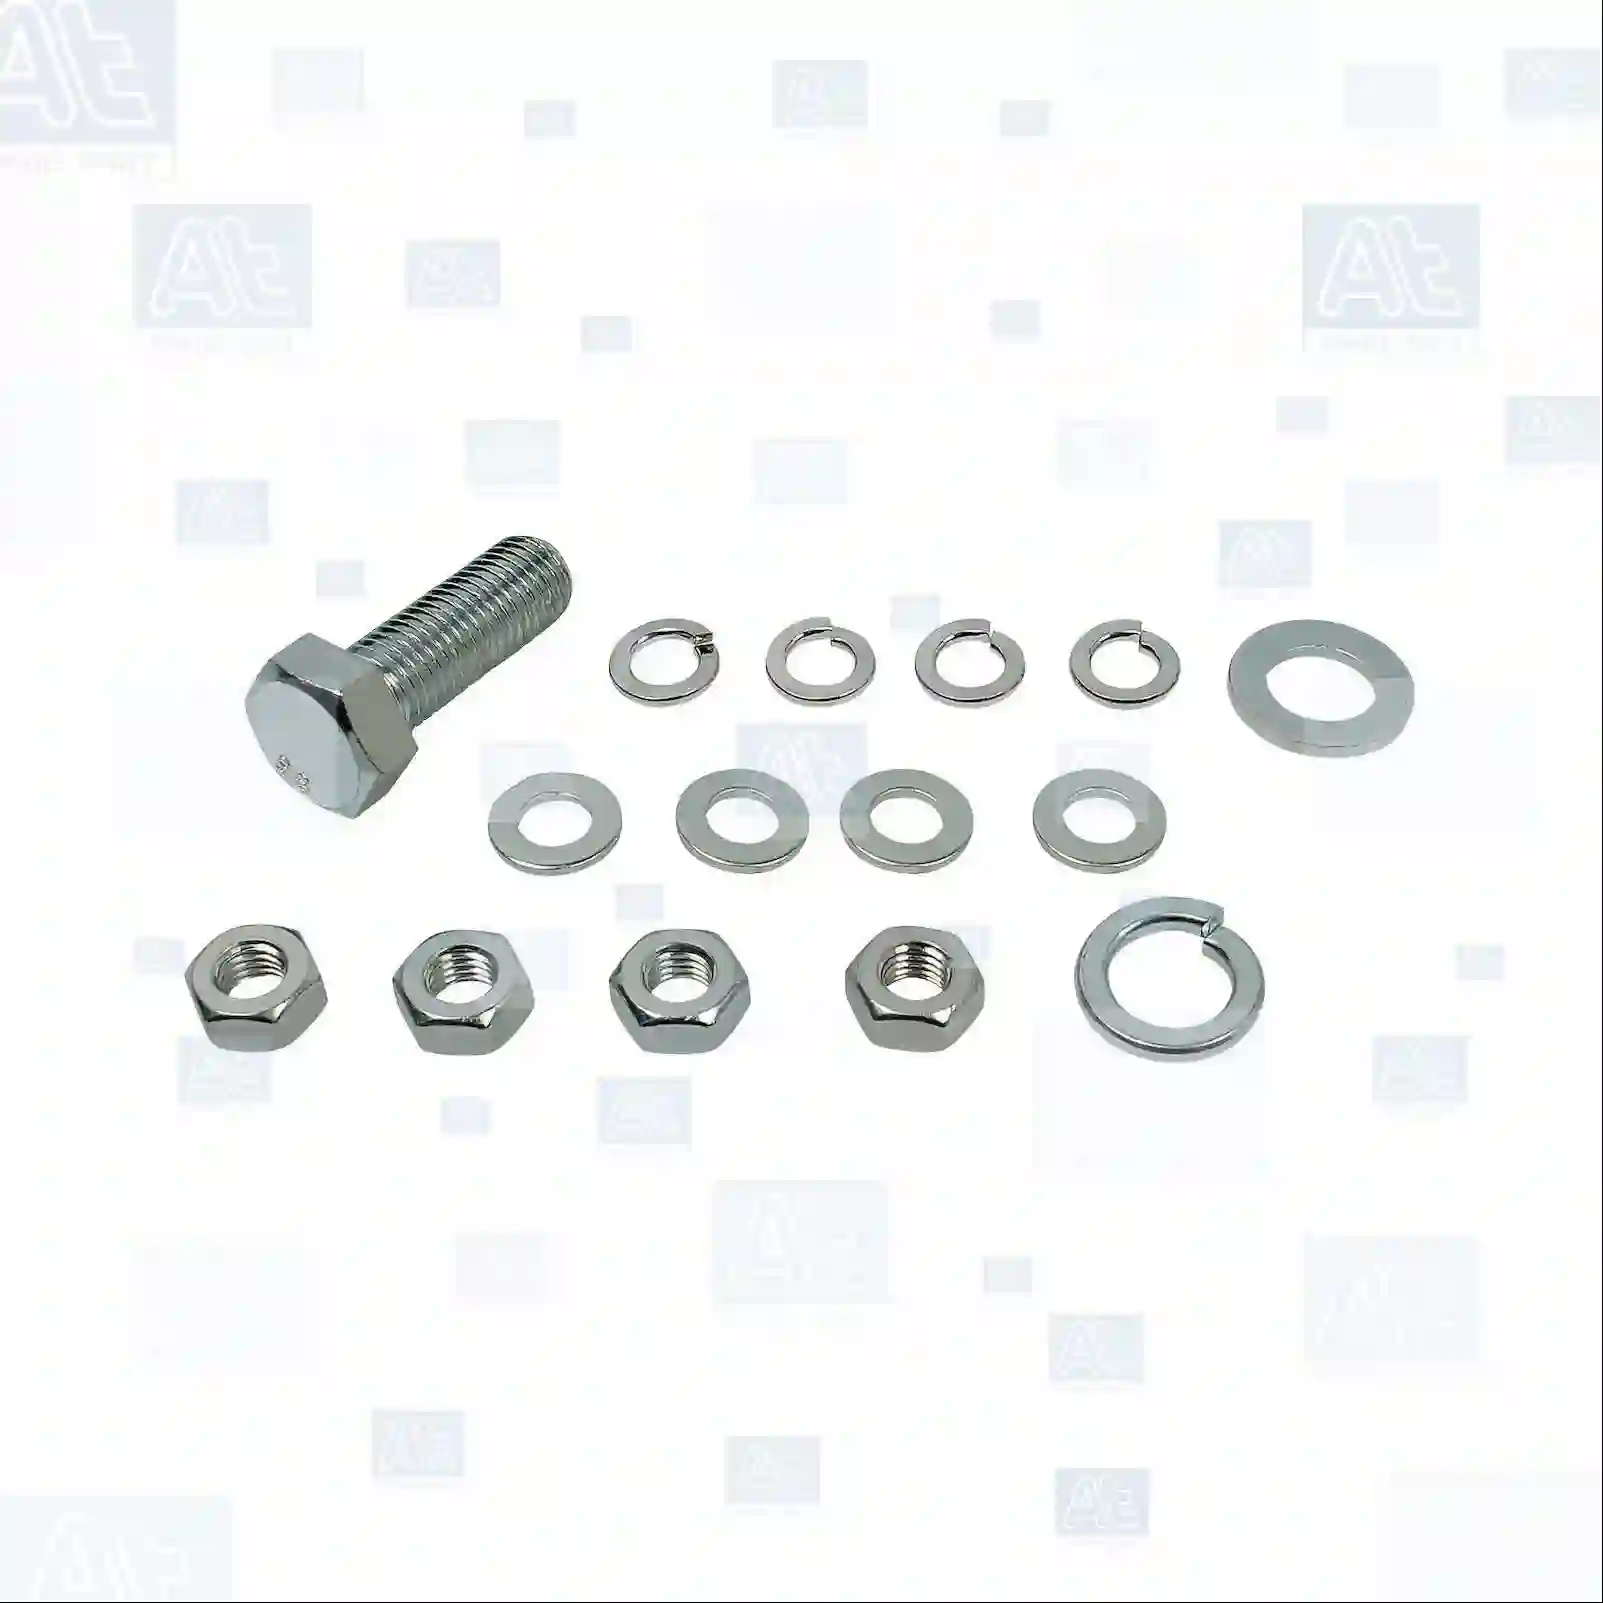 Mounting kit, air spring, at no 77727484, oem no: 0297721S, 0377498S, 0388165S, 0388166S, 0388167S, 0388168S, 0392011S, 0392022S, 0526651S, 1141525S, 1154759S, 1154761S, 1240503S, 1266381S, 1266382S, 1279141S, 1697678S, 1697682S, 1697684S, 1697685S, 1698434S, 297721S, 377498S, 388165S, 388166S, 388167S, 388168S, 392011S, 392022S, 526651S, MLF7053S, MLF7054S, MLF7056S, MLF7059S, MLF7060S, MLF7172S At Spare Part | Engine, Accelerator Pedal, Camshaft, Connecting Rod, Crankcase, Crankshaft, Cylinder Head, Engine Suspension Mountings, Exhaust Manifold, Exhaust Gas Recirculation, Filter Kits, Flywheel Housing, General Overhaul Kits, Engine, Intake Manifold, Oil Cleaner, Oil Cooler, Oil Filter, Oil Pump, Oil Sump, Piston & Liner, Sensor & Switch, Timing Case, Turbocharger, Cooling System, Belt Tensioner, Coolant Filter, Coolant Pipe, Corrosion Prevention Agent, Drive, Expansion Tank, Fan, Intercooler, Monitors & Gauges, Radiator, Thermostat, V-Belt / Timing belt, Water Pump, Fuel System, Electronical Injector Unit, Feed Pump, Fuel Filter, cpl., Fuel Gauge Sender,  Fuel Line, Fuel Pump, Fuel Tank, Injection Line Kit, Injection Pump, Exhaust System, Clutch & Pedal, Gearbox, Propeller Shaft, Axles, Brake System, Hubs & Wheels, Suspension, Leaf Spring, Universal Parts / Accessories, Steering, Electrical System, Cabin Mounting kit, air spring, at no 77727484, oem no: 0297721S, 0377498S, 0388165S, 0388166S, 0388167S, 0388168S, 0392011S, 0392022S, 0526651S, 1141525S, 1154759S, 1154761S, 1240503S, 1266381S, 1266382S, 1279141S, 1697678S, 1697682S, 1697684S, 1697685S, 1698434S, 297721S, 377498S, 388165S, 388166S, 388167S, 388168S, 392011S, 392022S, 526651S, MLF7053S, MLF7054S, MLF7056S, MLF7059S, MLF7060S, MLF7172S At Spare Part | Engine, Accelerator Pedal, Camshaft, Connecting Rod, Crankcase, Crankshaft, Cylinder Head, Engine Suspension Mountings, Exhaust Manifold, Exhaust Gas Recirculation, Filter Kits, Flywheel Housing, General Overhaul Kits, Engine, Intake Manifold, Oil Cleaner, Oil Cooler, Oil Filter, Oil Pump, Oil Sump, Piston & Liner, Sensor & Switch, Timing Case, Turbocharger, Cooling System, Belt Tensioner, Coolant Filter, Coolant Pipe, Corrosion Prevention Agent, Drive, Expansion Tank, Fan, Intercooler, Monitors & Gauges, Radiator, Thermostat, V-Belt / Timing belt, Water Pump, Fuel System, Electronical Injector Unit, Feed Pump, Fuel Filter, cpl., Fuel Gauge Sender,  Fuel Line, Fuel Pump, Fuel Tank, Injection Line Kit, Injection Pump, Exhaust System, Clutch & Pedal, Gearbox, Propeller Shaft, Axles, Brake System, Hubs & Wheels, Suspension, Leaf Spring, Universal Parts / Accessories, Steering, Electrical System, Cabin